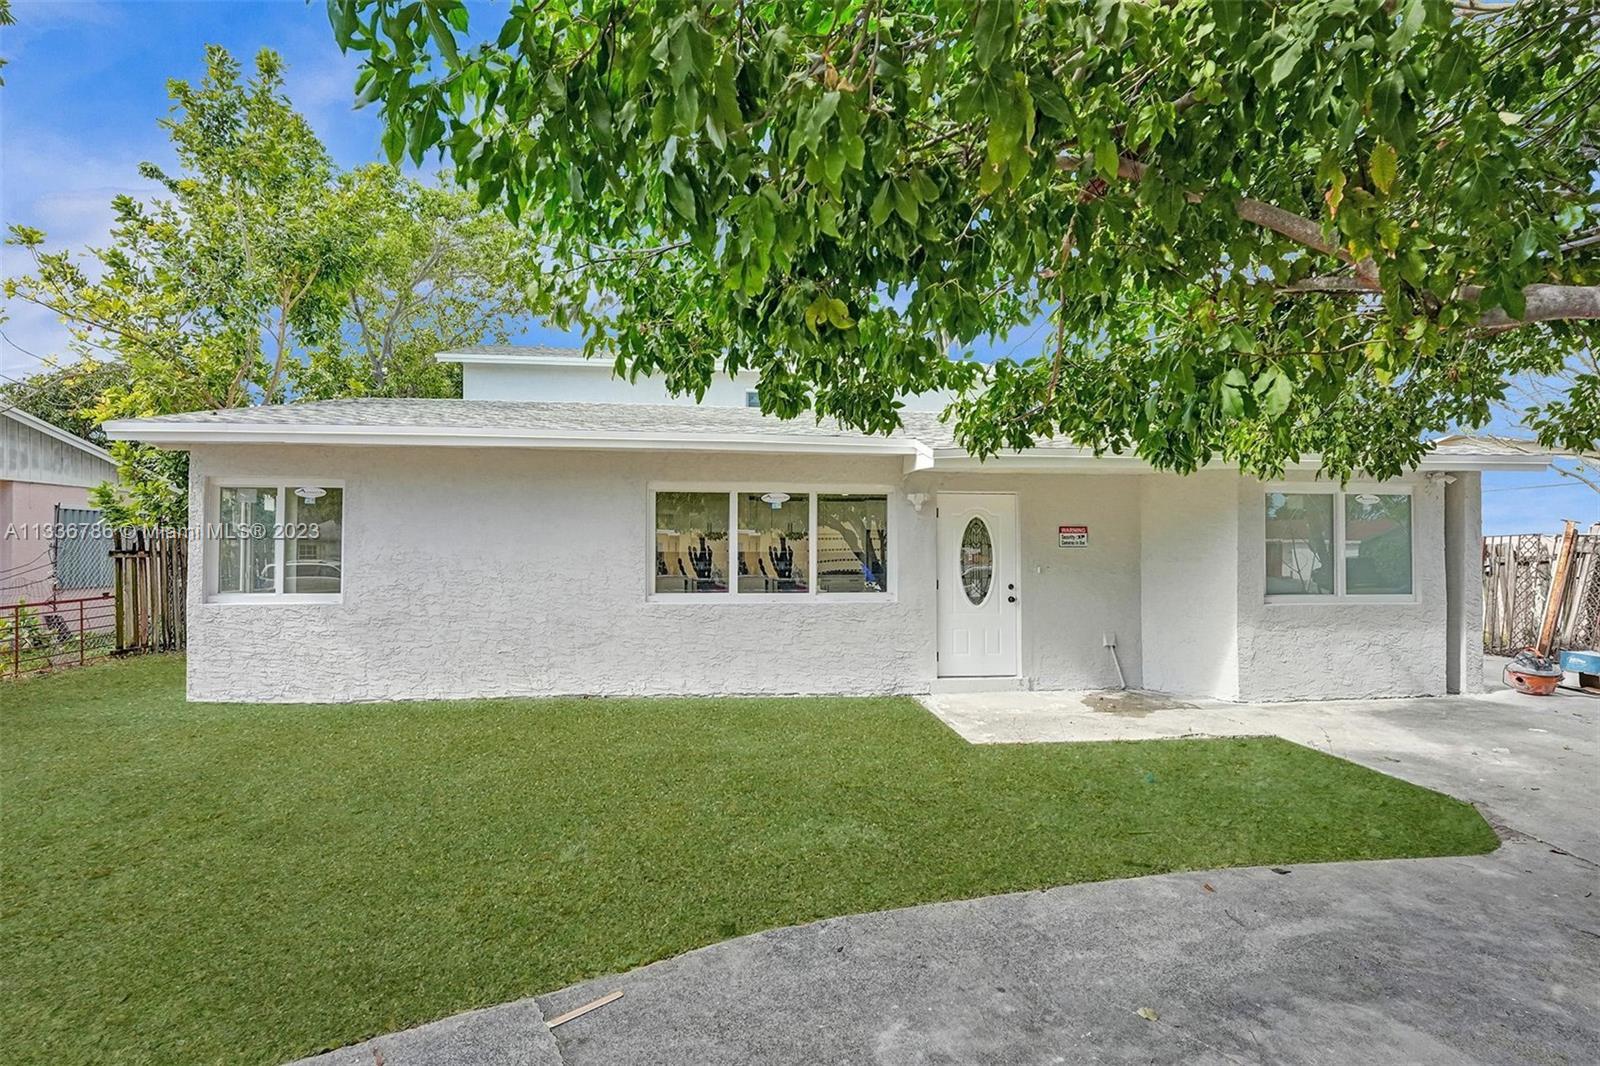 This completely renovated duplex property located in North Broward highlands couldn't be more perfec